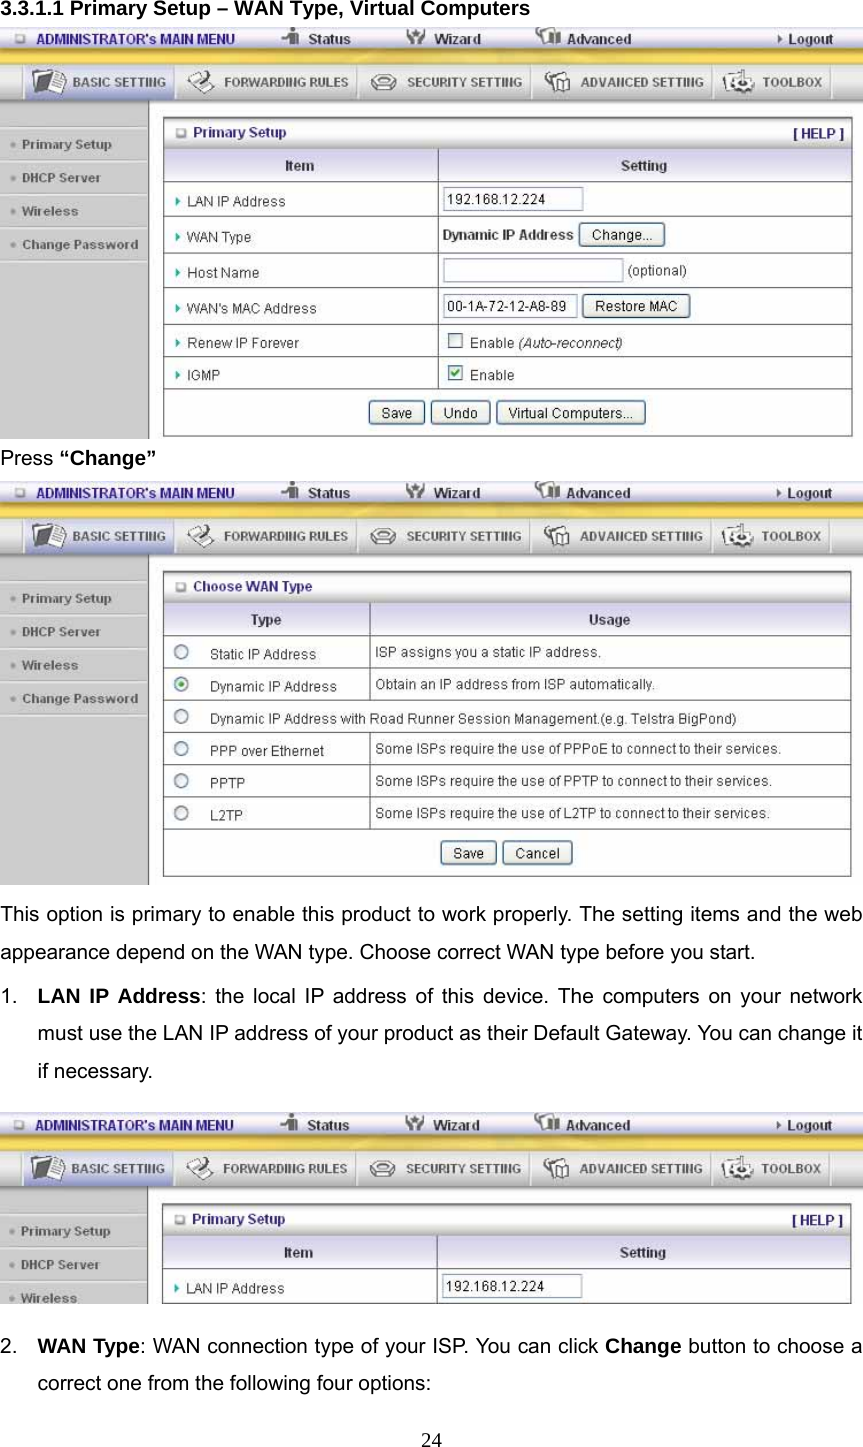  24 3.3.1.1 Primary Setup – WAN Type, Virtual Computers  Press “Change”  This option is primary to enable this product to work properly. The setting items and the web appearance depend on the WAN type. Choose correct WAN type before you start. 1.  LAN IP Address: the local IP address of this device. The computers on your network must use the LAN IP address of your product as their Default Gateway. You can change it if necessary.  2.  WAN Type: WAN connection type of your ISP. You can click Change button to choose a correct one from the following four options: 